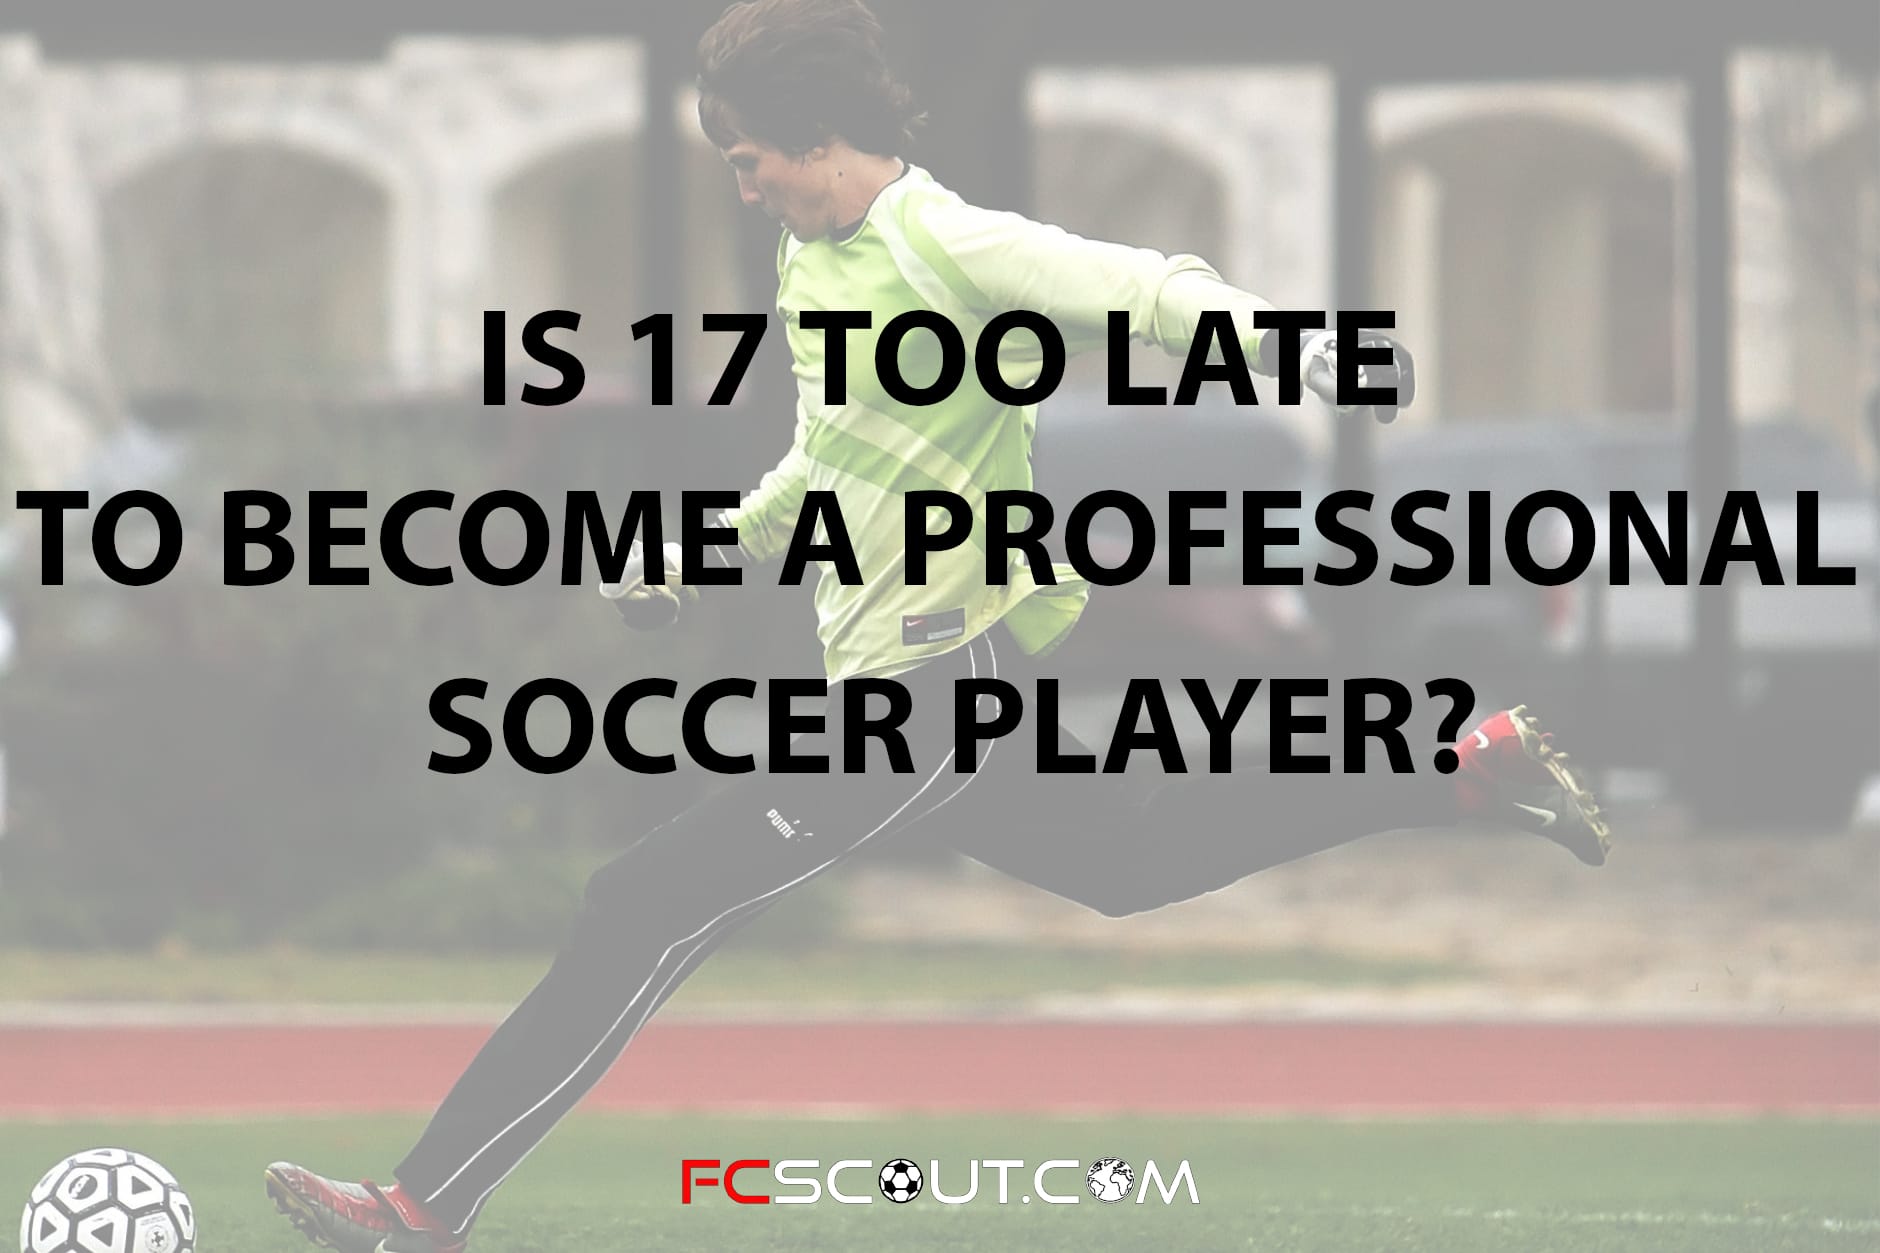 Is 17 too late to become a professional soccer player?